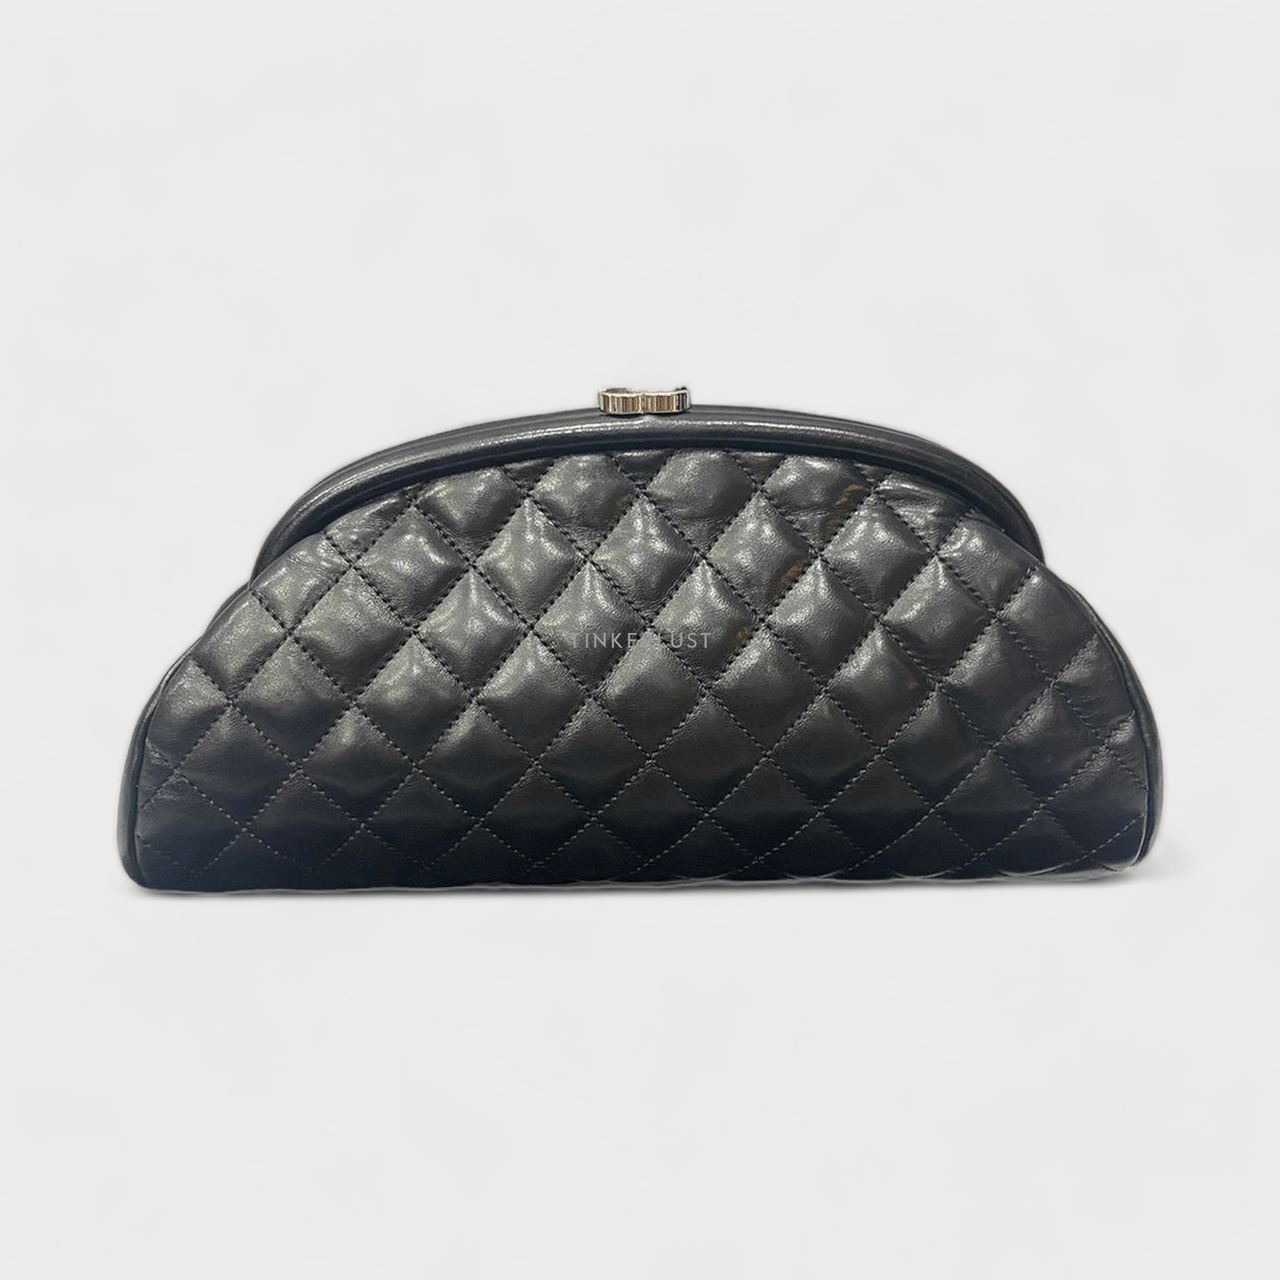 Chanel Timeless Black Quilted Leather #15 Clutch